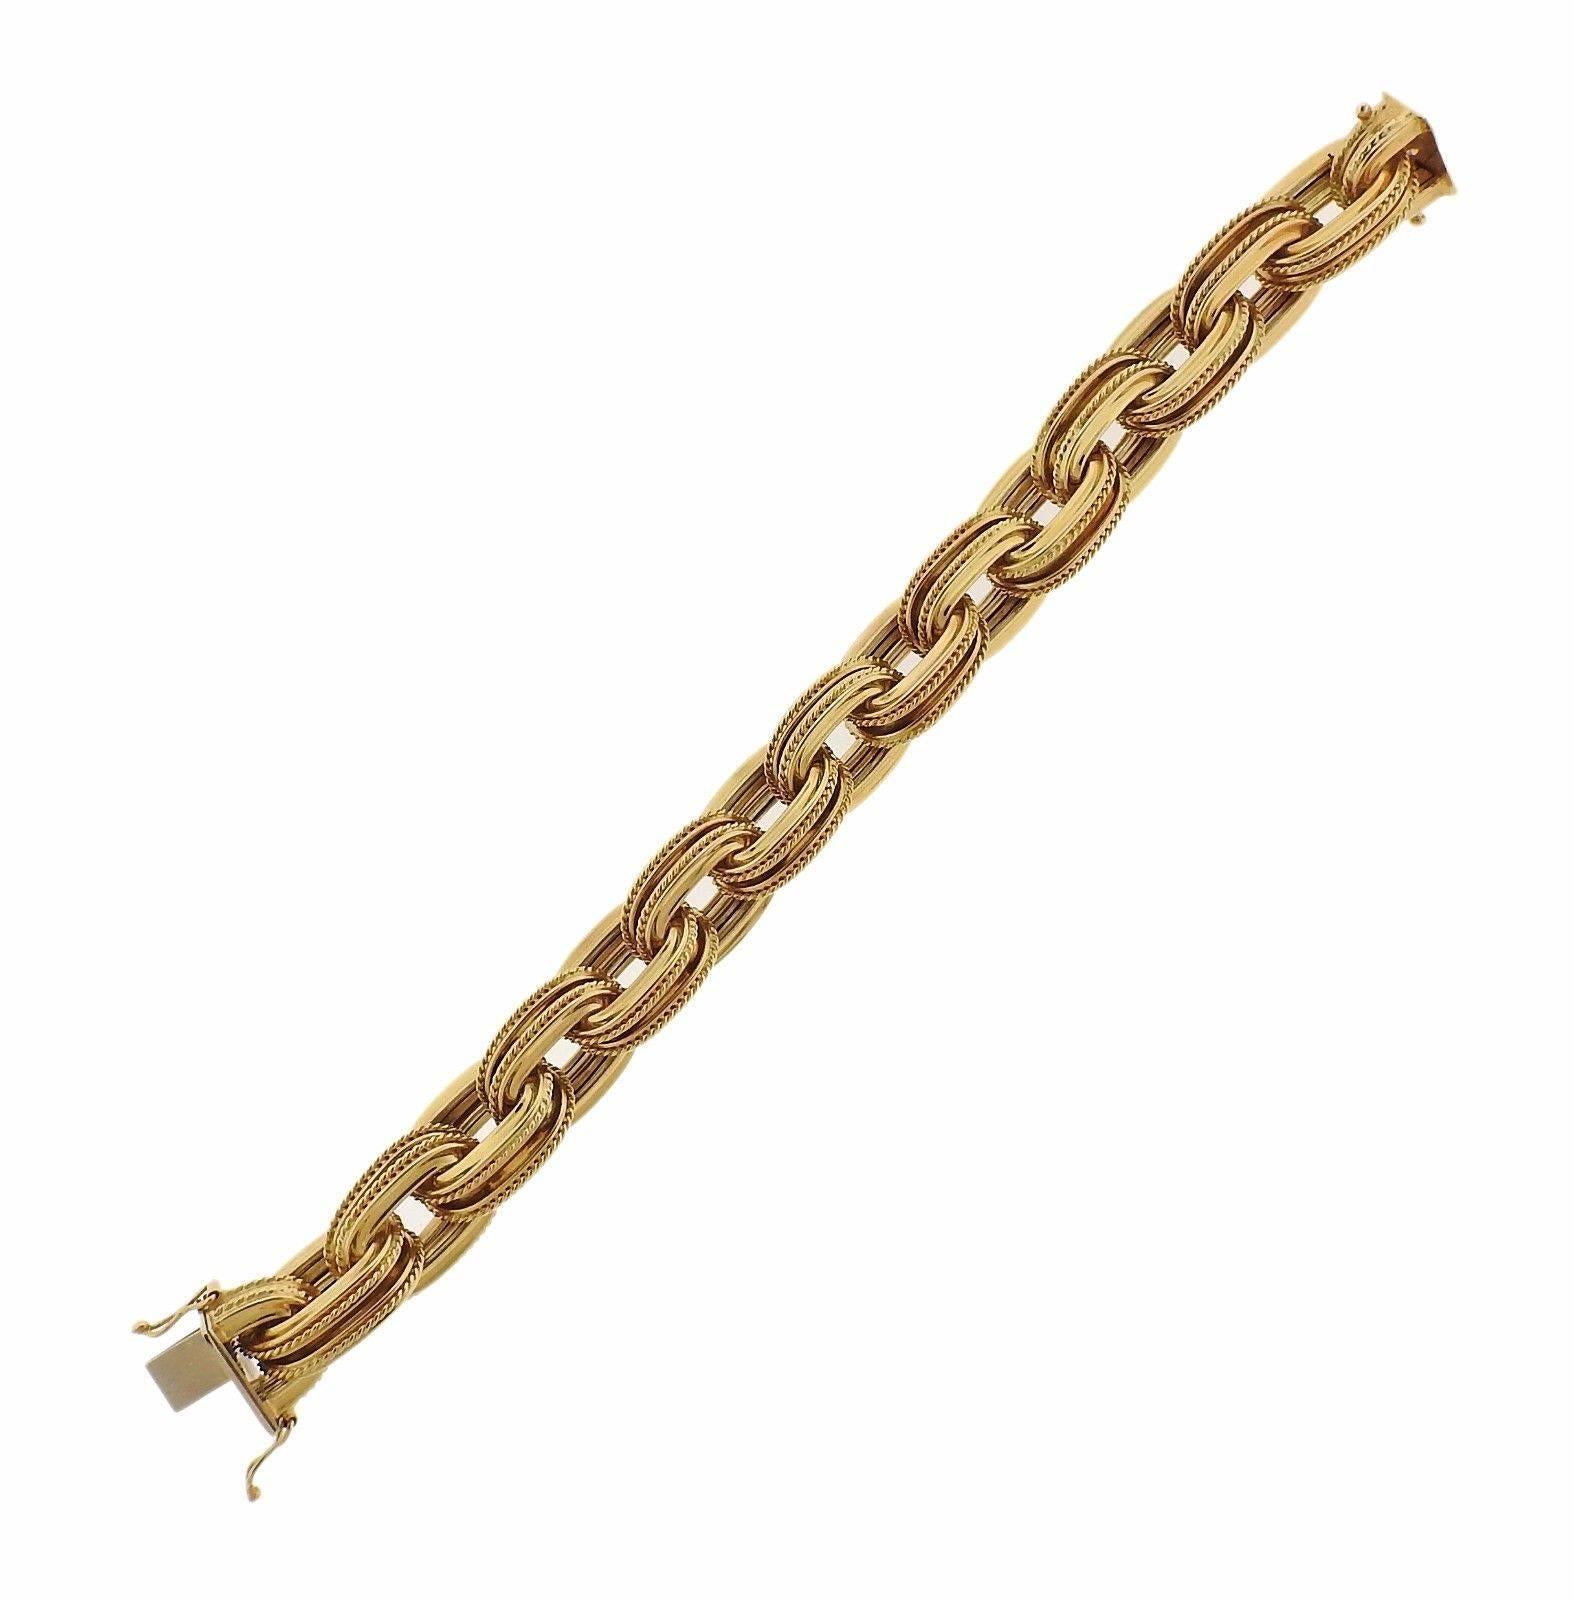 An 18k yellow gold bracelet.  The bracelet is 8" long and 15mm wide.  The piece will fit an approximately 6 3/4" wrist.  The weight of the piece is 68.3 grams.  Marked: 18k Italy OTC.